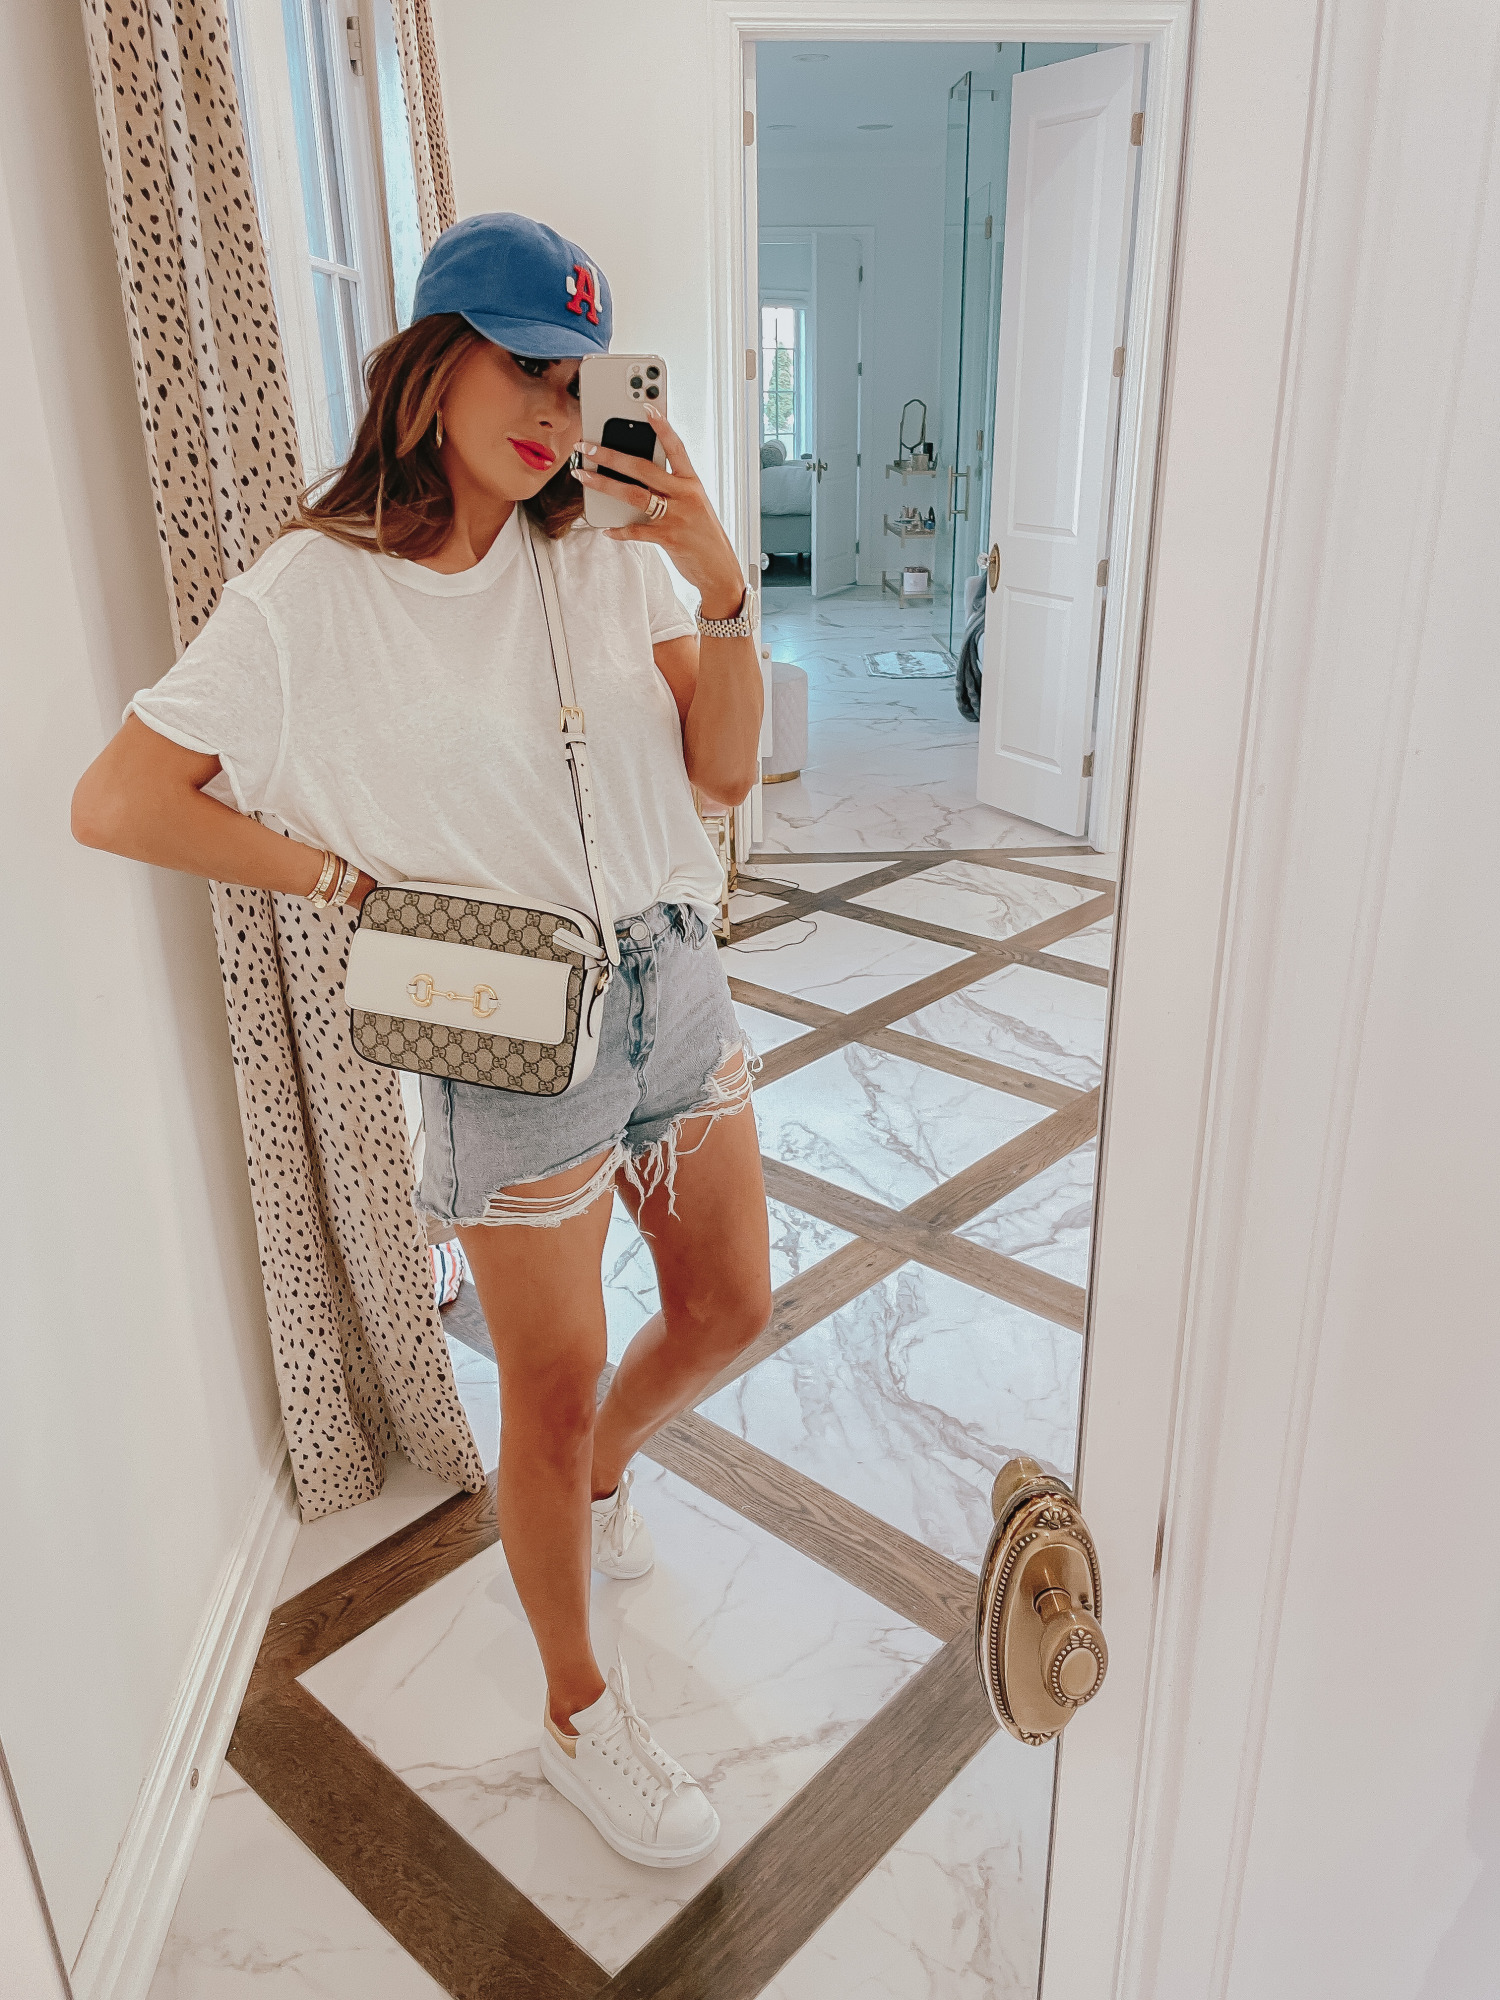 july 4 outfit inspiration 2021, pinterest july 4 outfit, gucci red lipstick, gucci 1955 horsebit crossbody, Emily gemma |  June Instagram Recap by popular US fashion blog, The Sweetest Thing: image of Emily Gemma wearing a blue baseball cap, white t-shirt, distressed shorts, and white sneakers. 